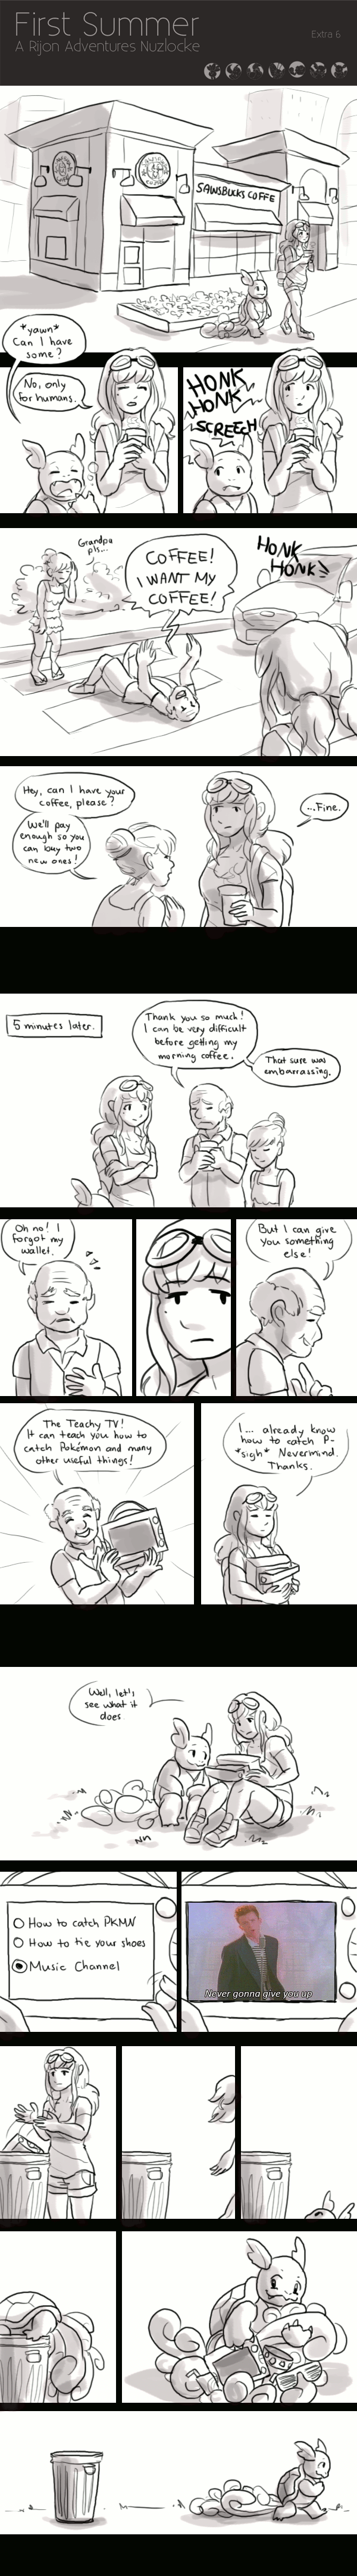 First Summer - Extra: Coffee